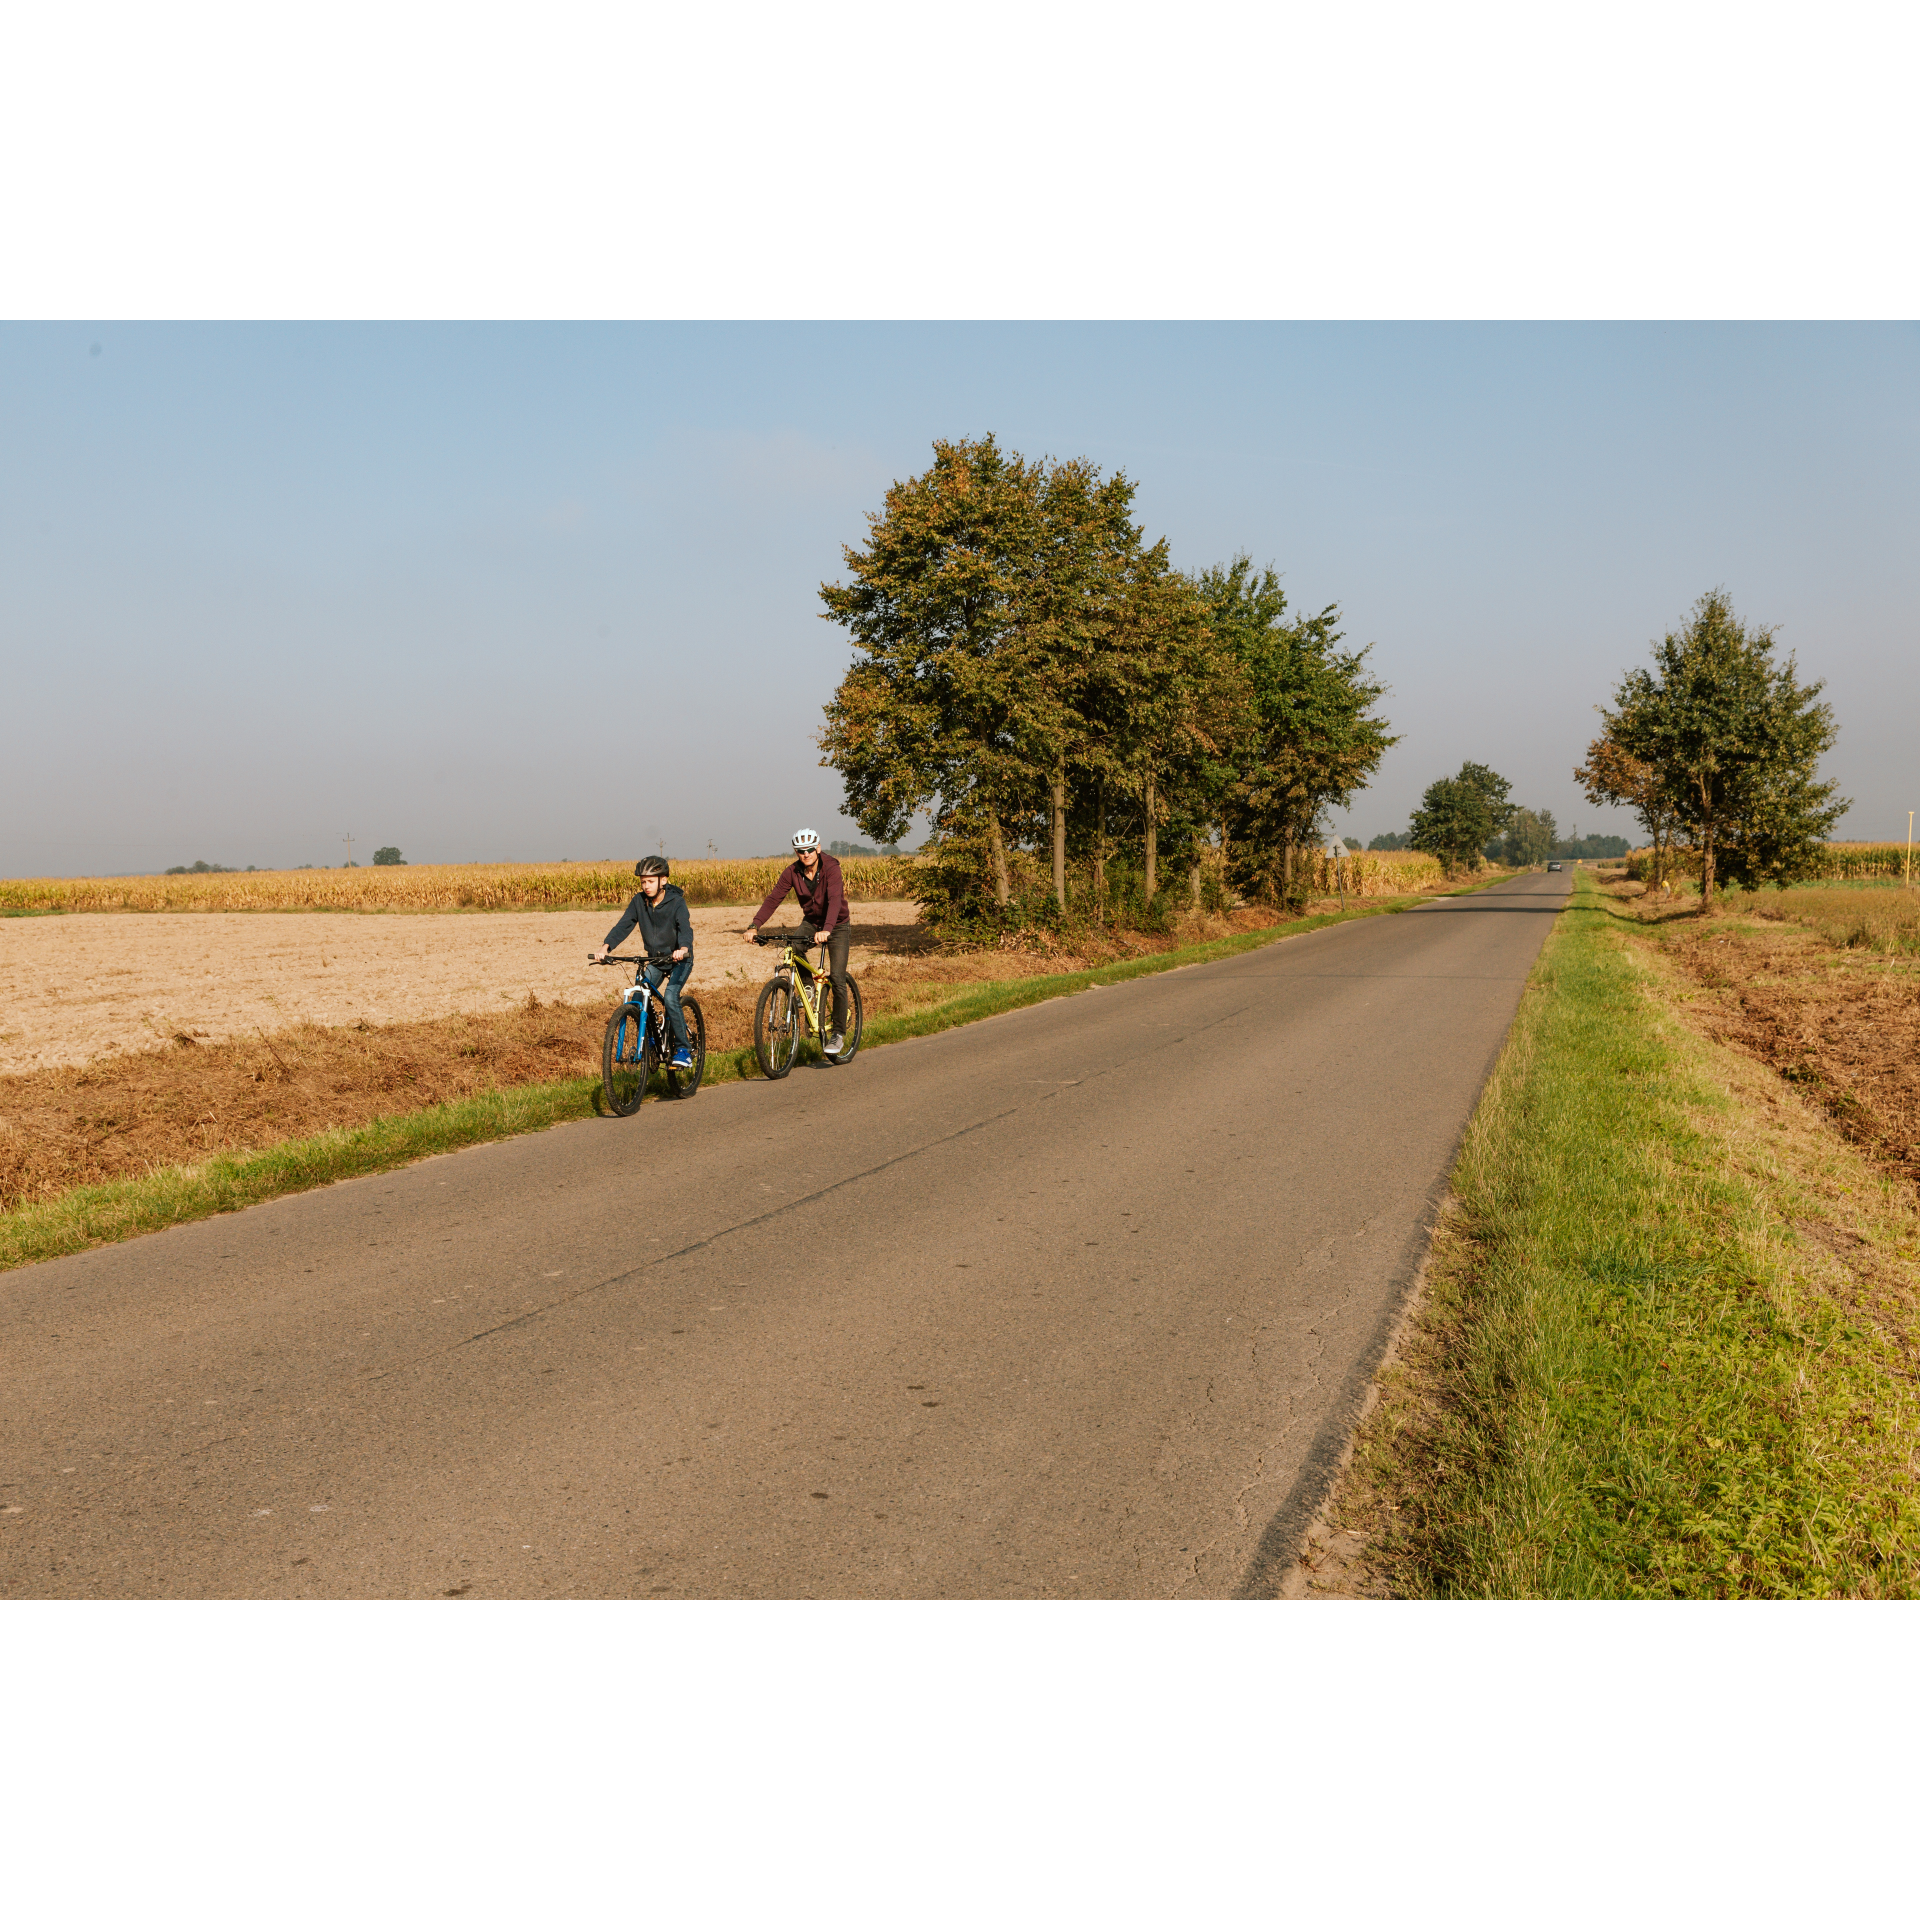 Cyclists and fields